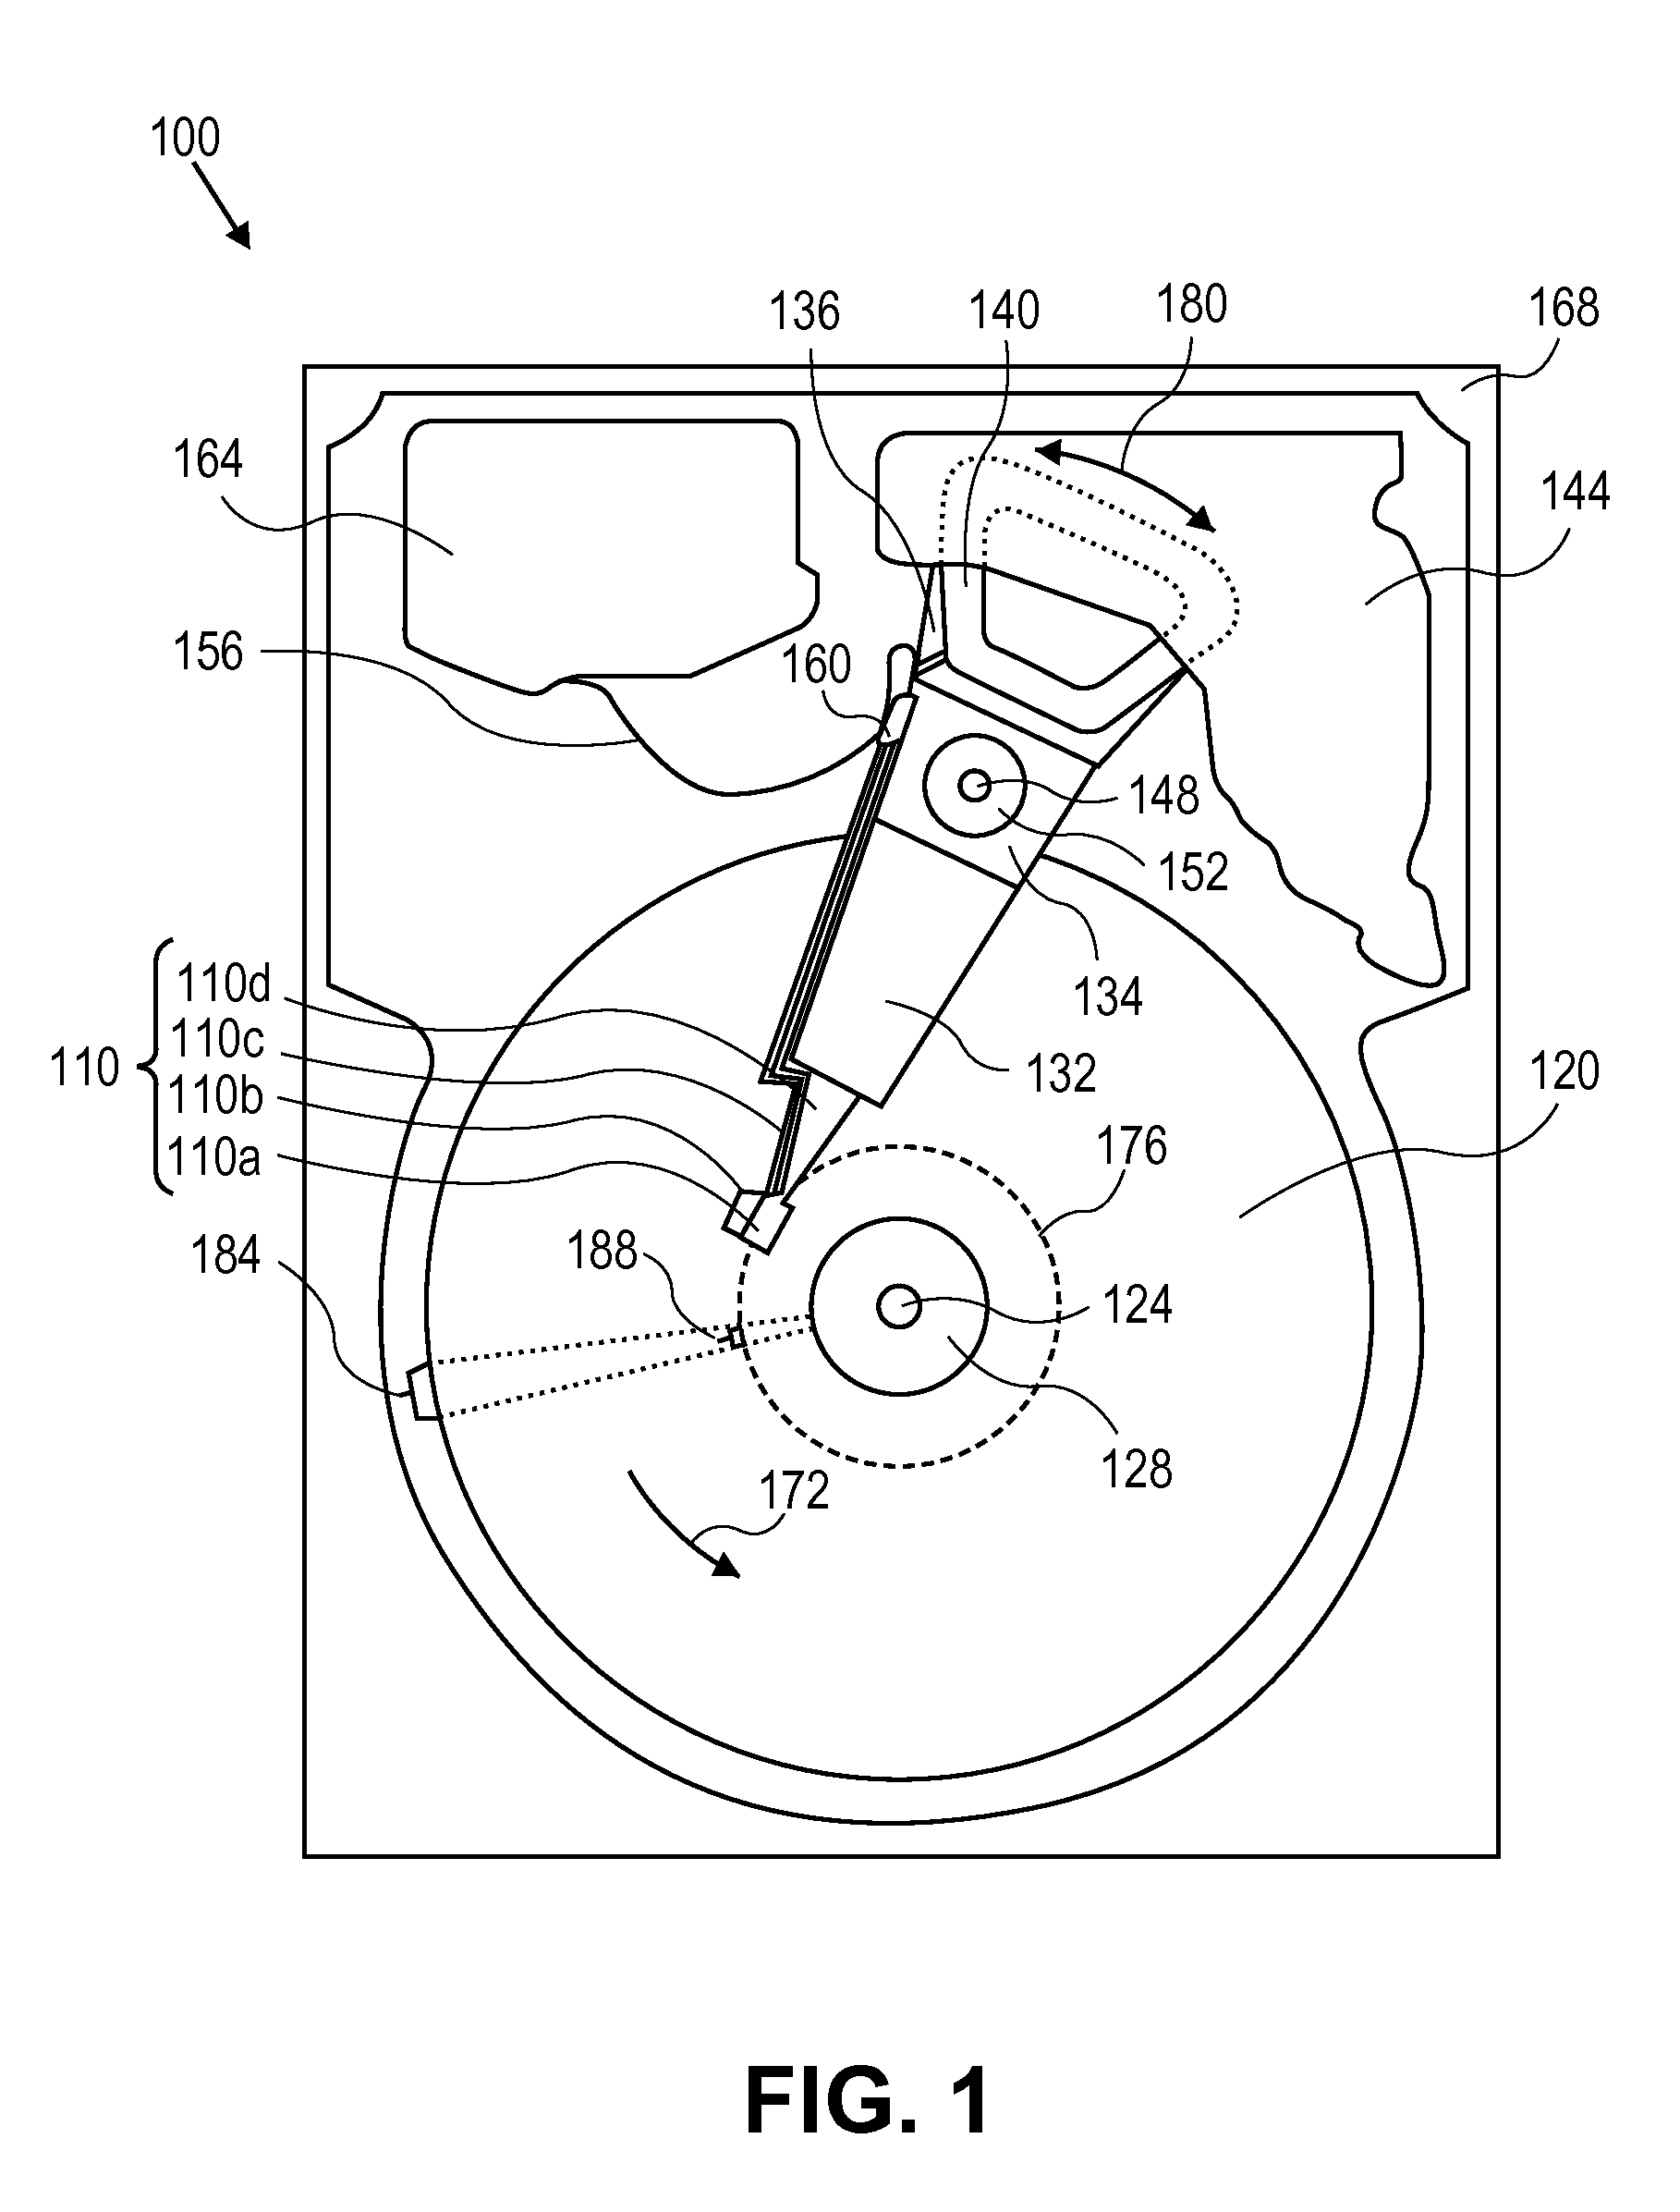 Magnetic storage device with multi-functional component for controlling chemical and water vapor therein